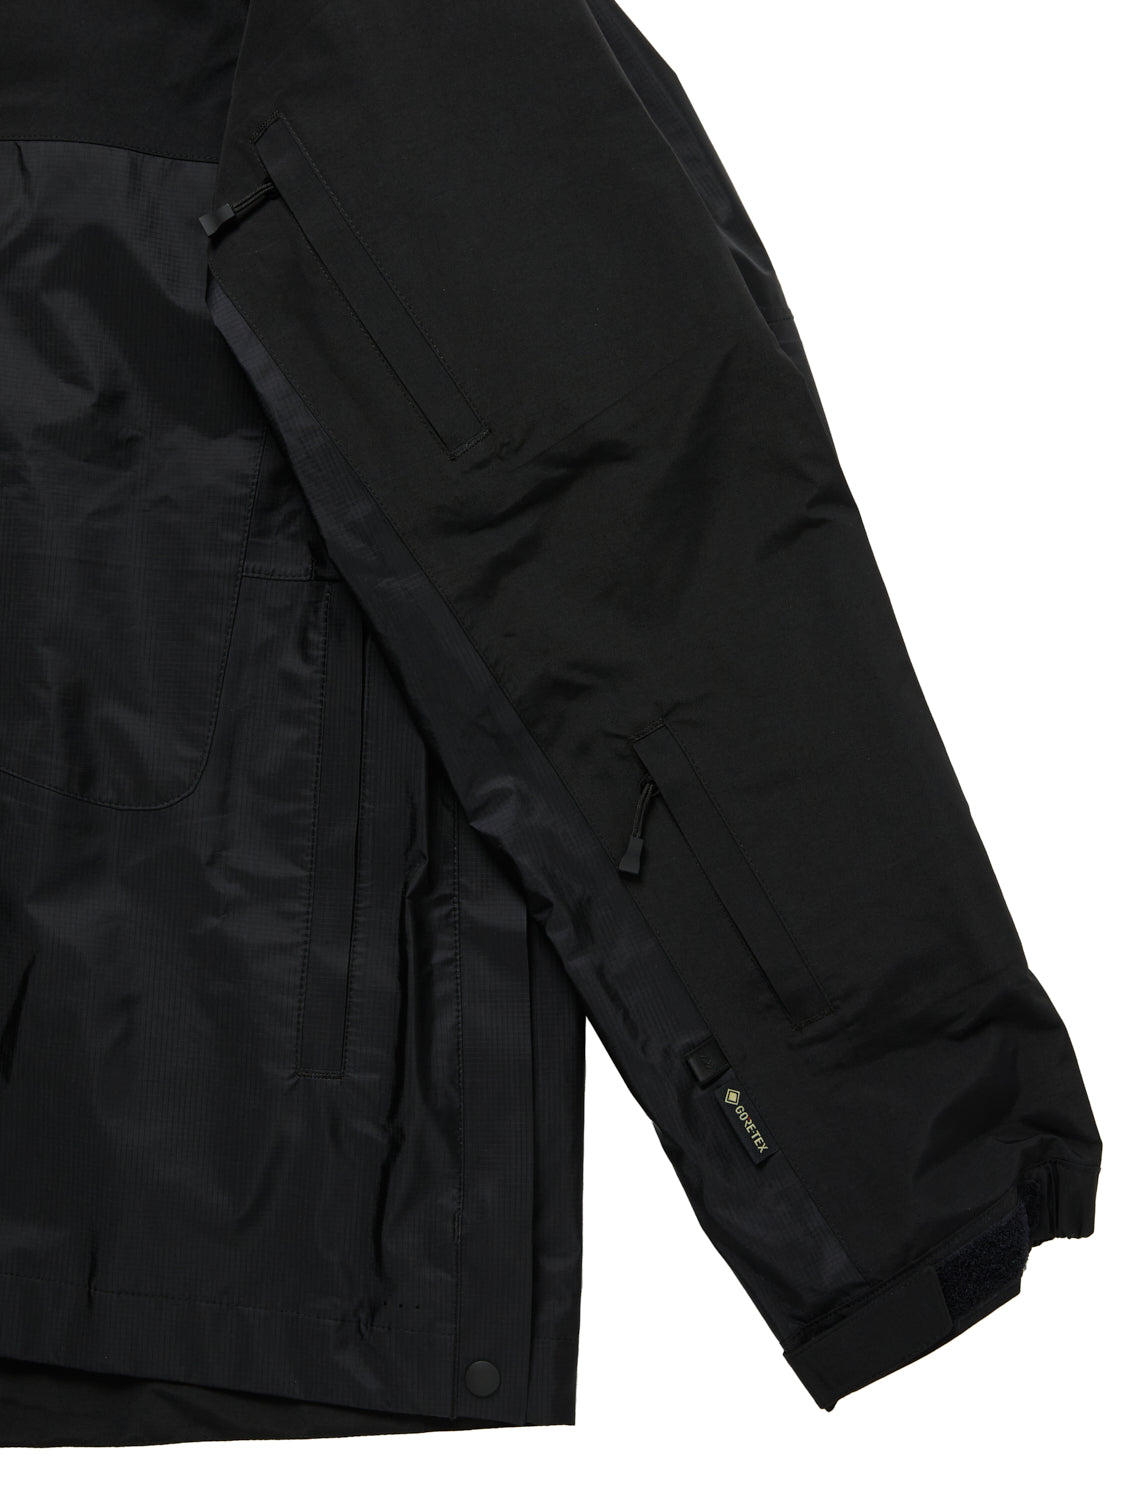 DAIWA PIER39 GORE-TEX TECH TACTICAL WADING JACKET – unexpected store